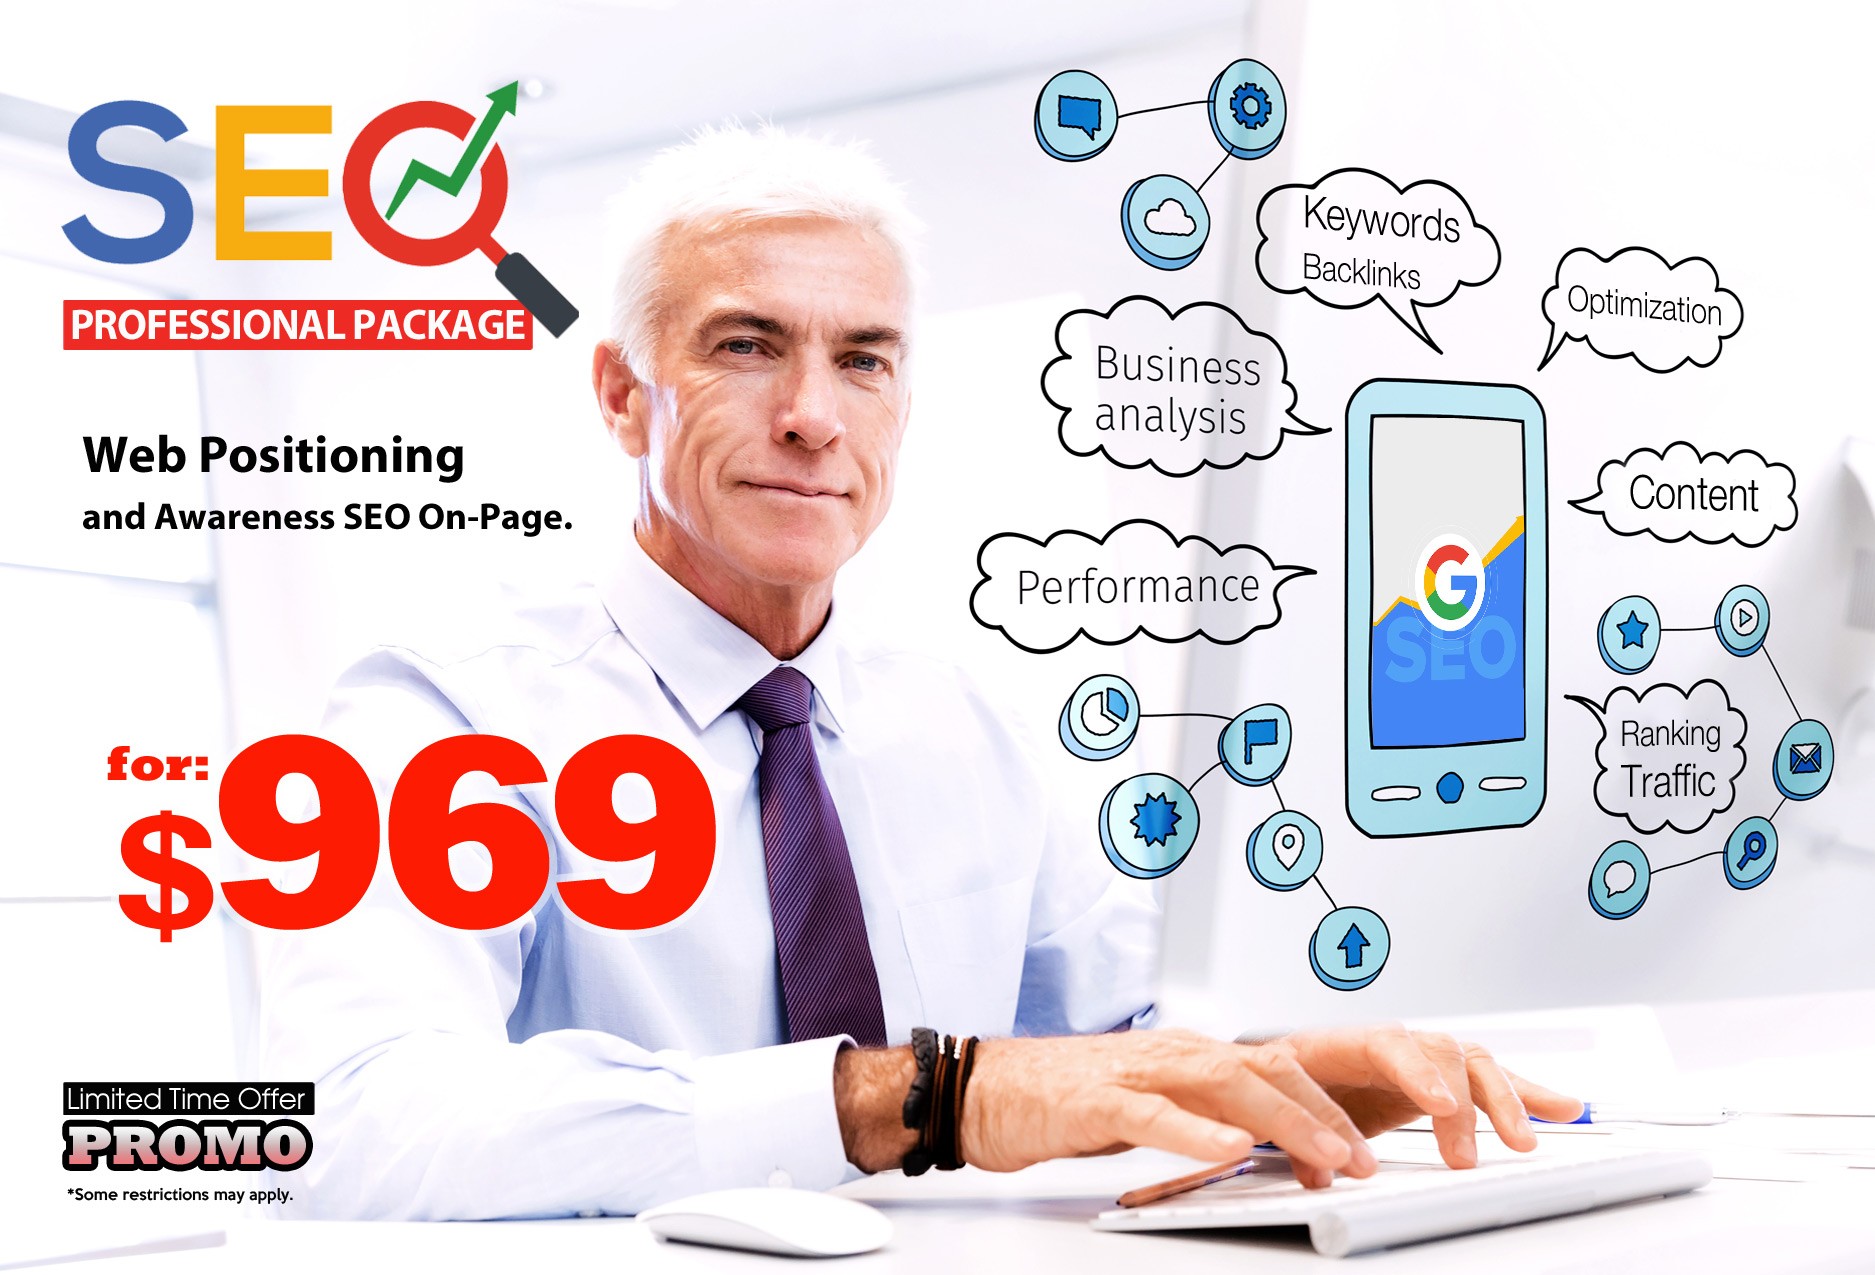 QuintAdvertising-Promo-GOOGLE-SEO-ON-PAGE-969